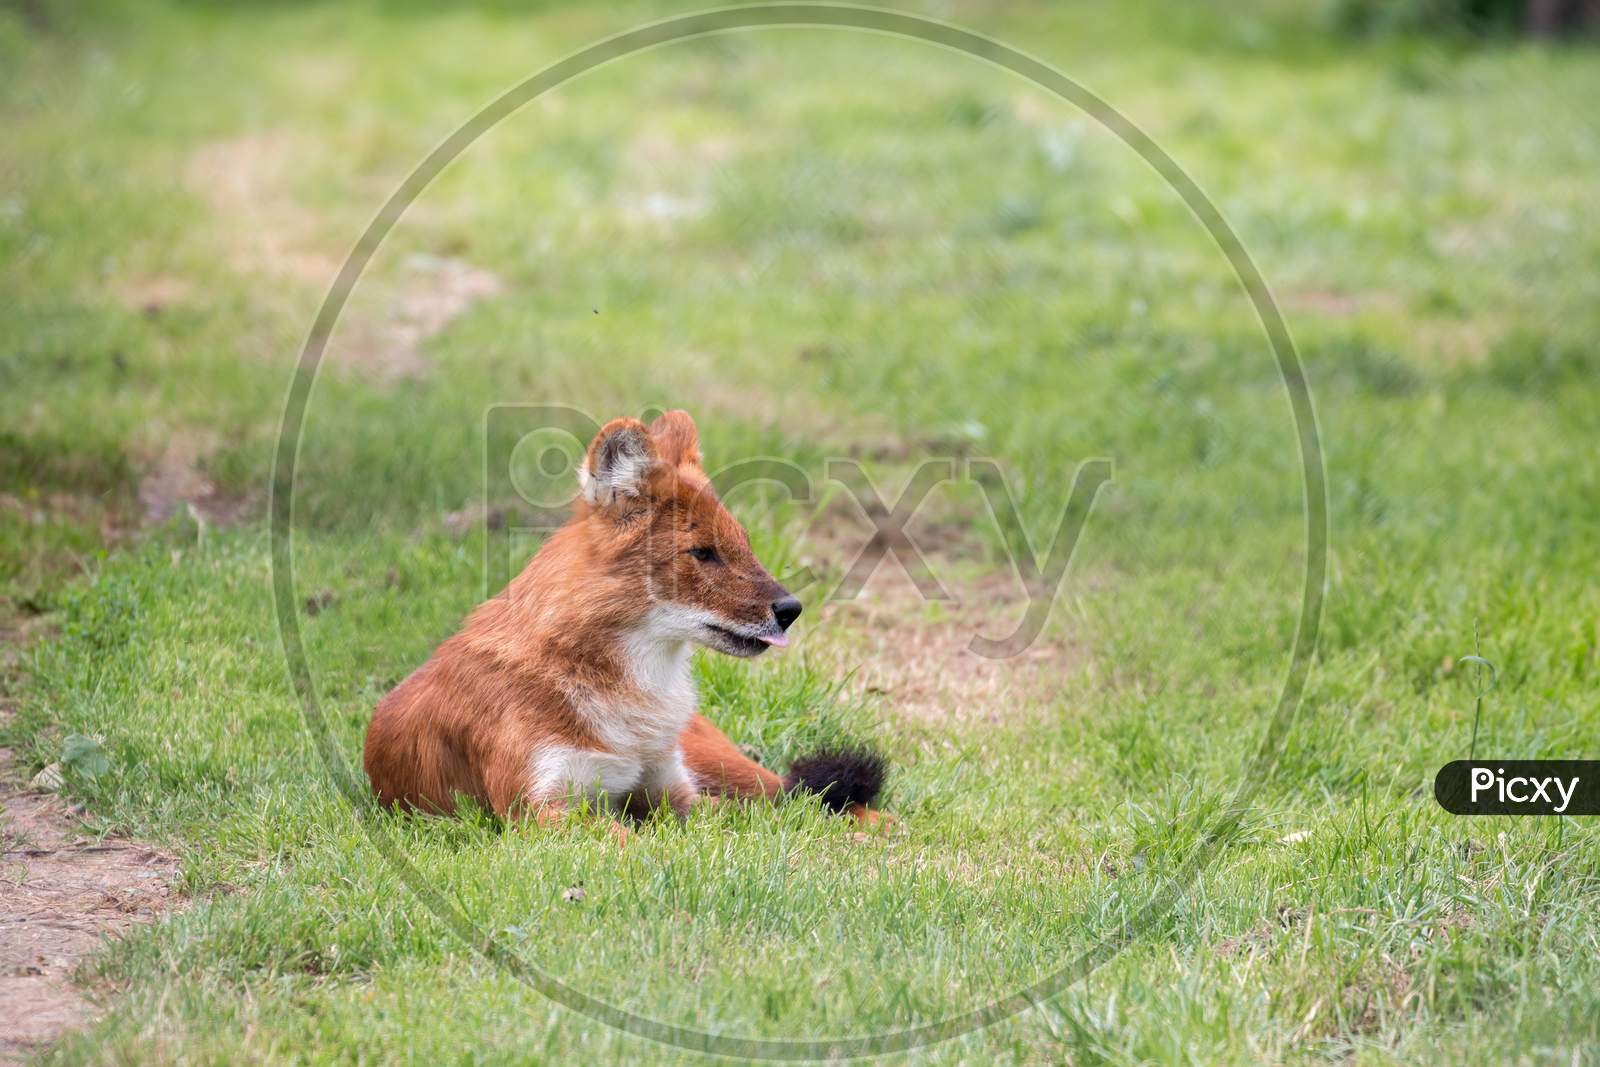 Dhole (Cuon Alpinus) Also Called The Asiatic Wild Dog Or Indian Wild Dog